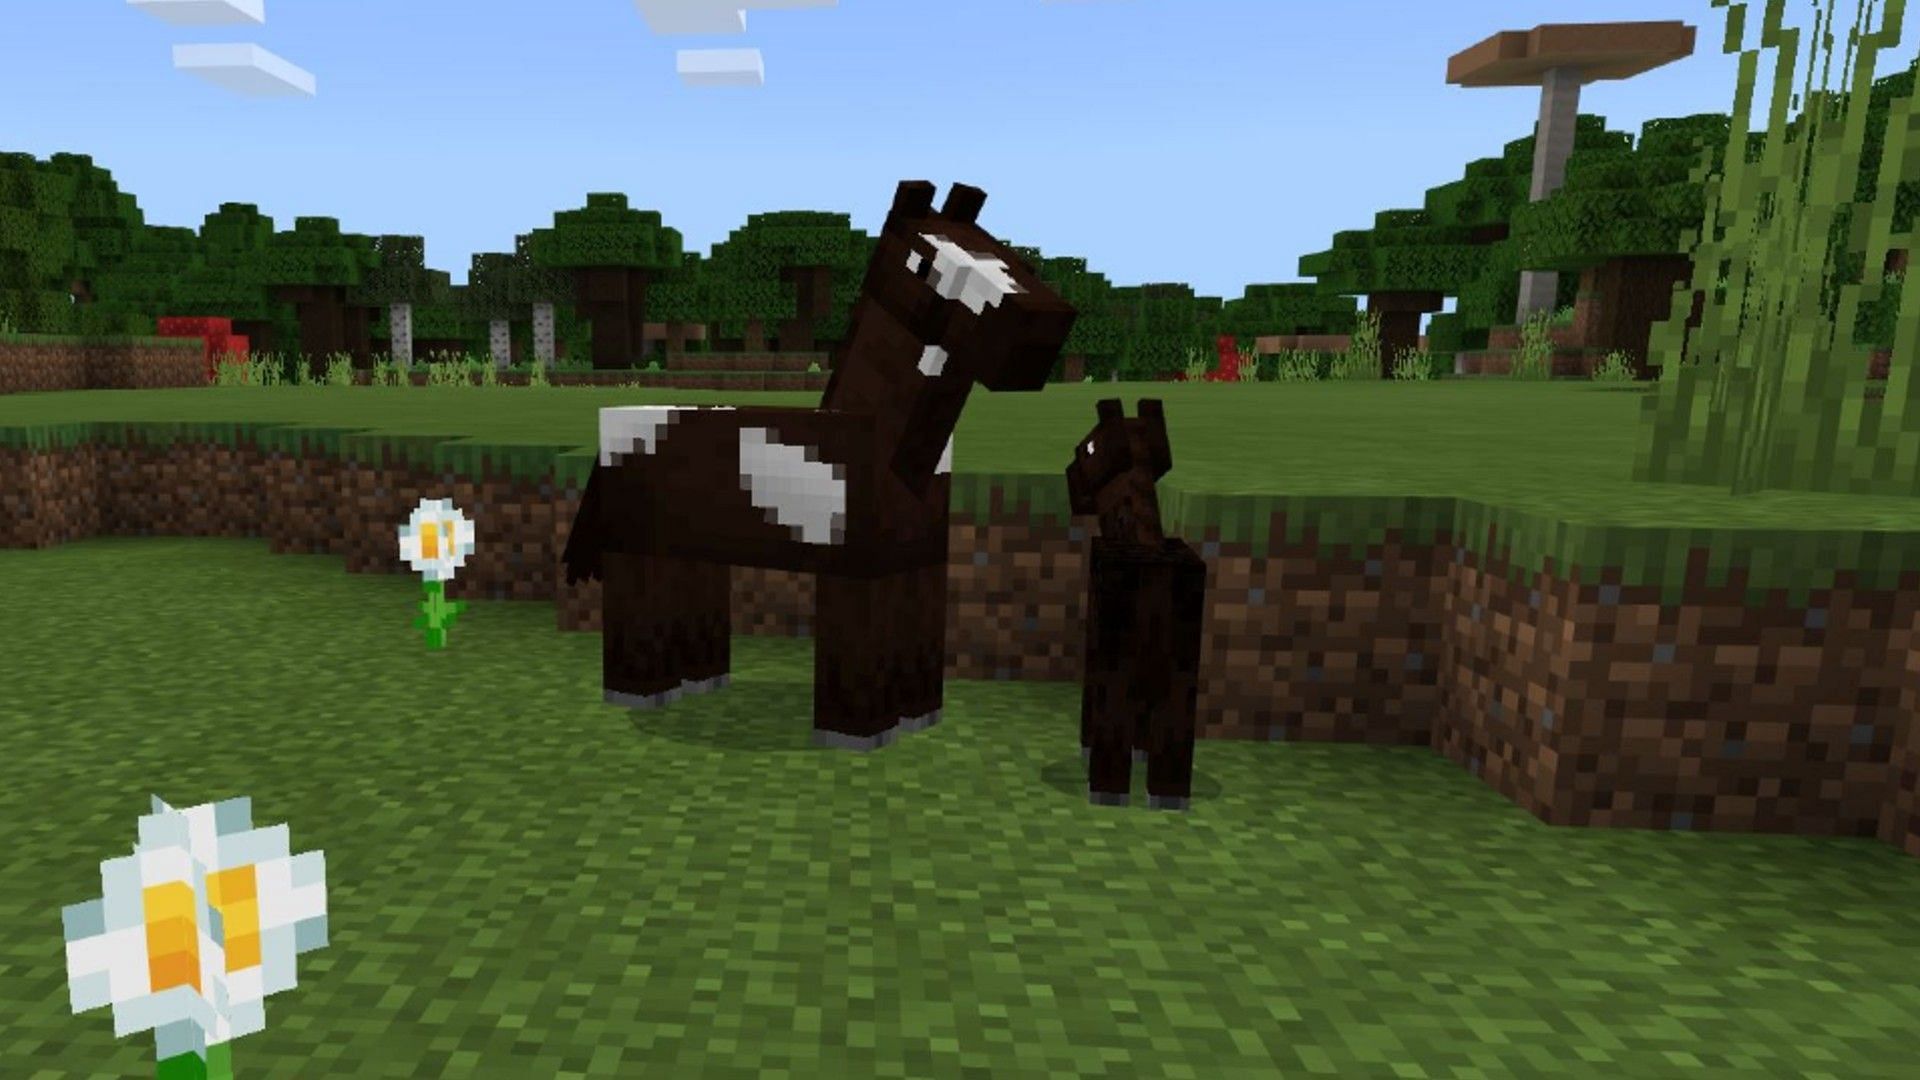 Horses have been a part of Minecraft for quite some time (Image via Mojang)